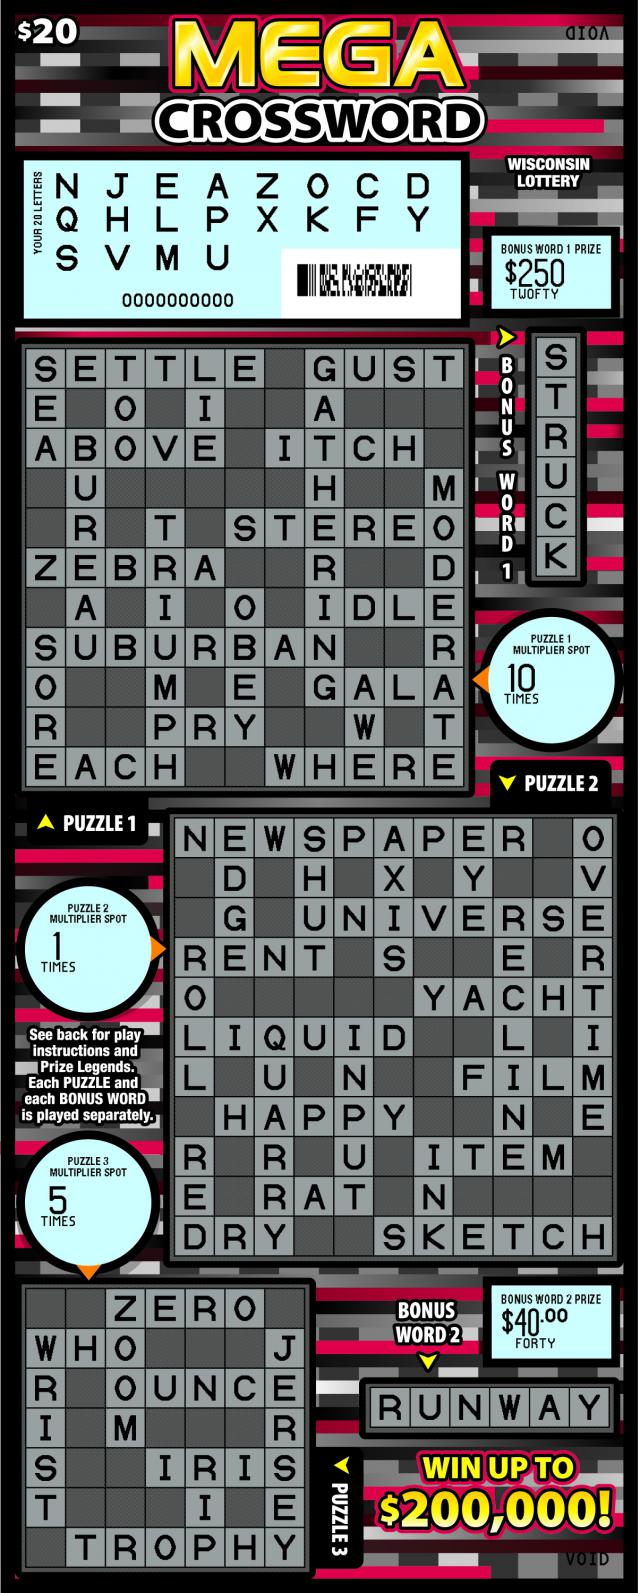 Mega Crossword instant scratch ticket from Wisconsin Lottery - scratched